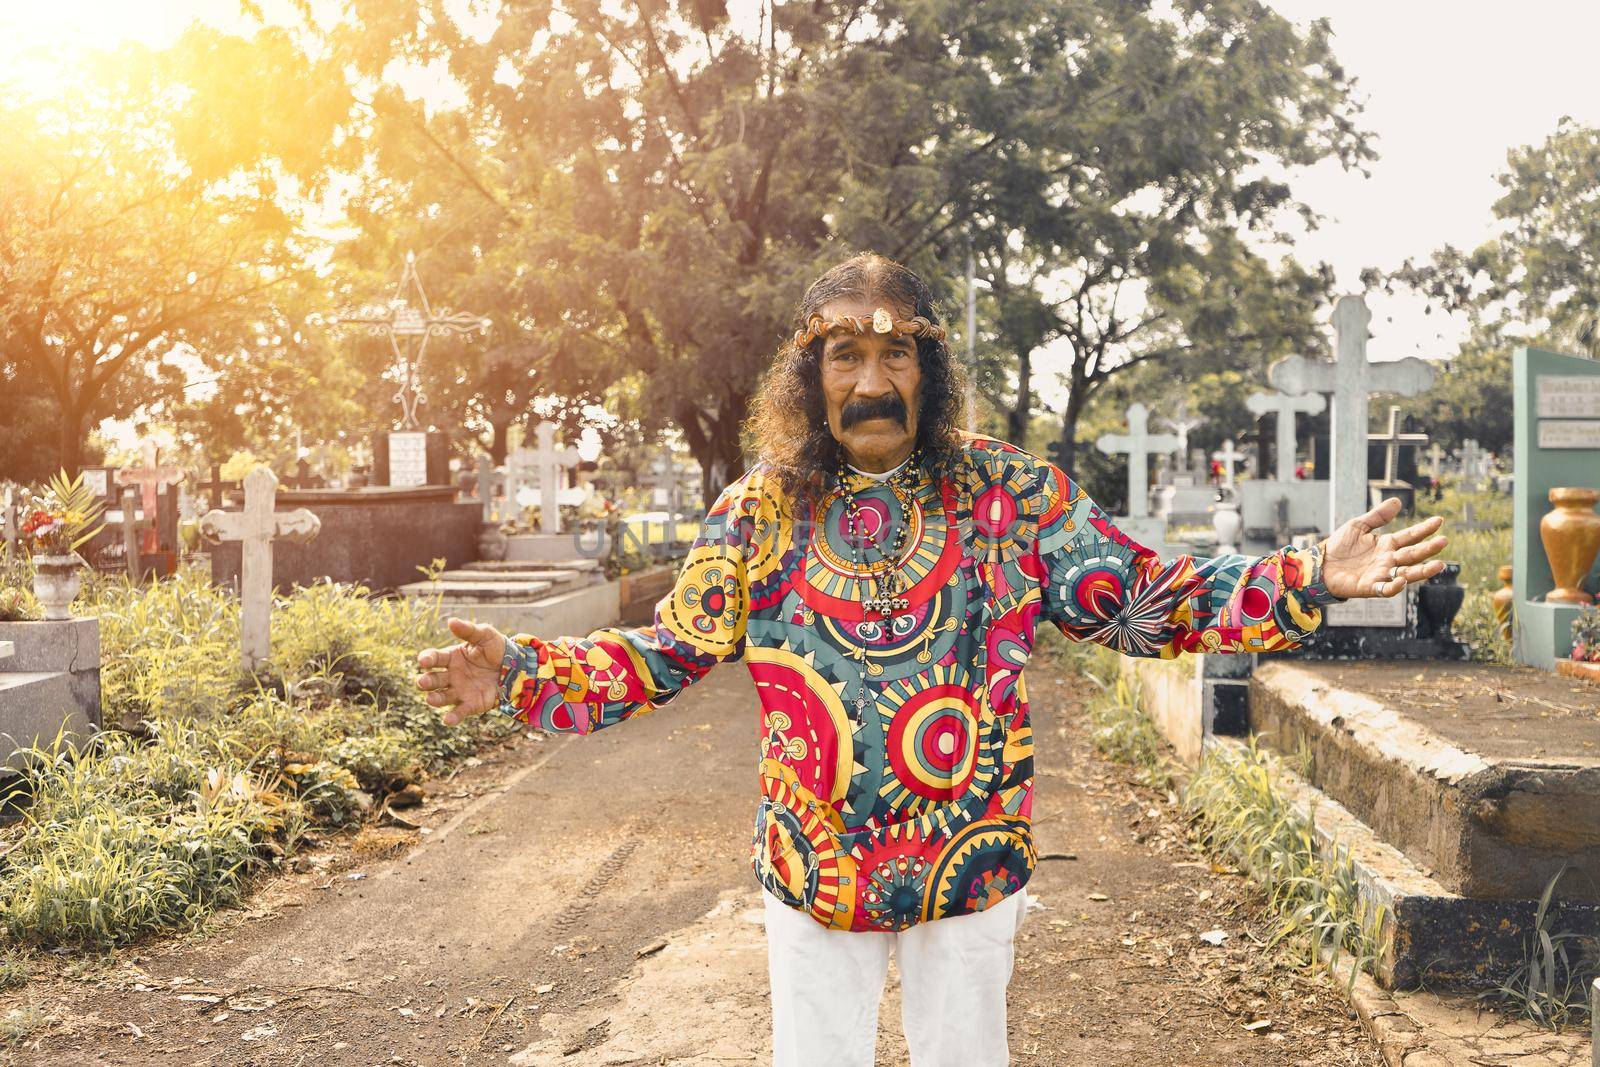 Elderly imitator of Christ with psychedelic clothing in a cemetery in Managua Nicaragua